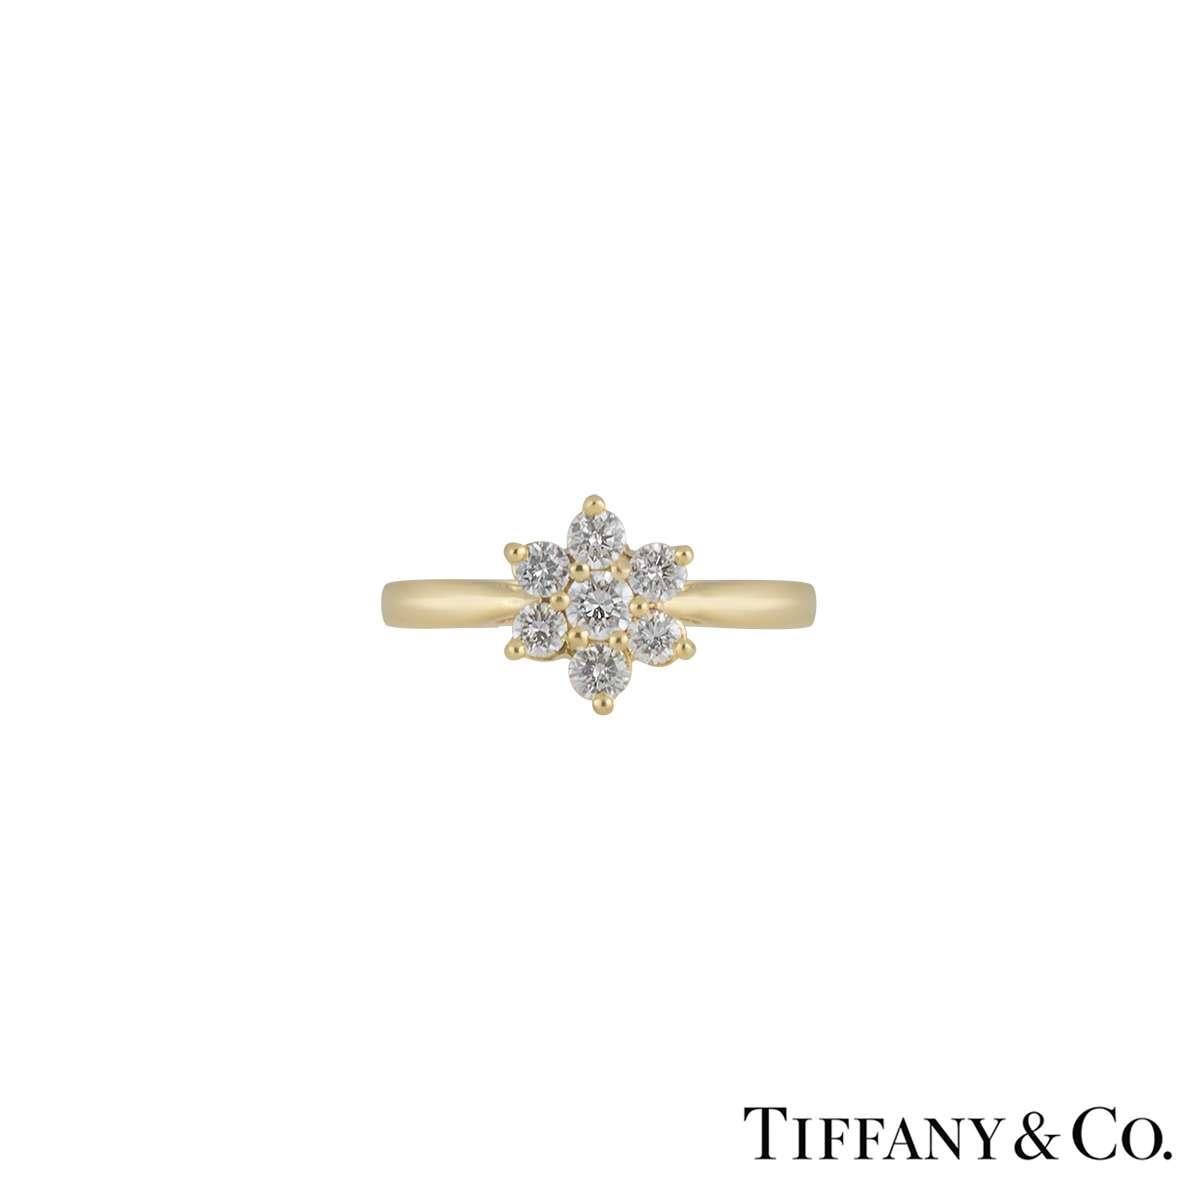 A unique Tiffany & Co 18k yellow gold diamond flower ring. This ring consists of a single round brilliant cut diamond for the centre with a further 6 round brilliant cut diamonds surrounding the outer edge, totalling approximately 0.47ct. The ring